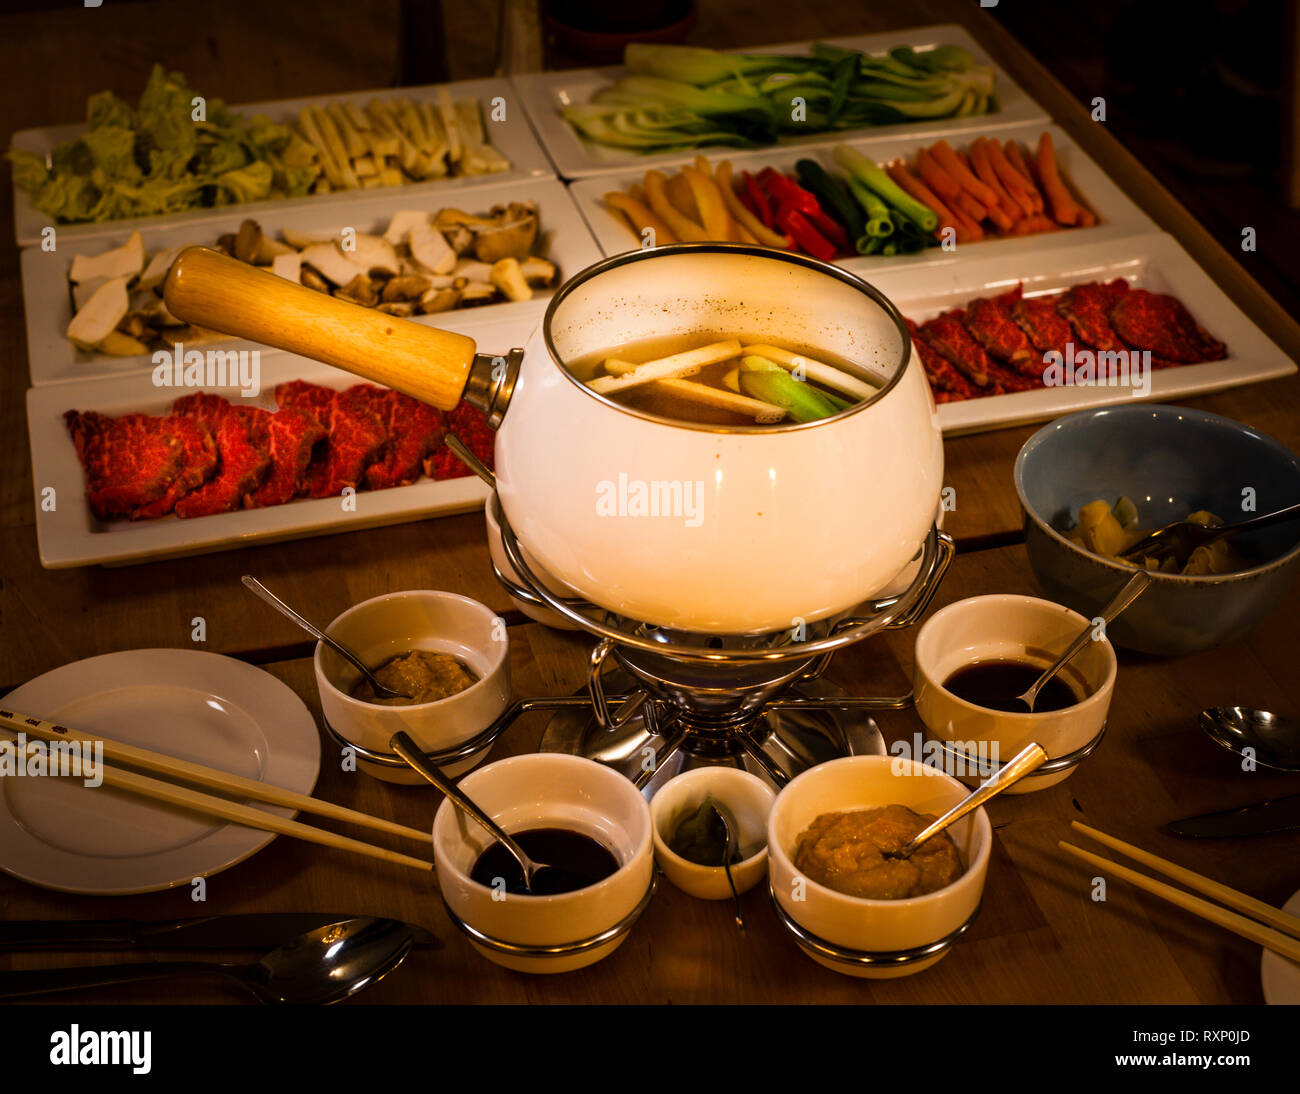 Japanese Fondue in the Restaurant of Kavaliershaus, Fincken, Germany. A fondue of a special kind can be ordered by the guests. Japanese ingredients such as ponzu sauce meet the most tender beef from Mecklenburg. In a light miso broth the beef is cooked as well as a large selection of vegetables. Ponzu sauce, soy sauce and sesame sauce are served for seasoning. A nice melange of Asian lightness and down-to-earth ingredients from the region. Stock Photo